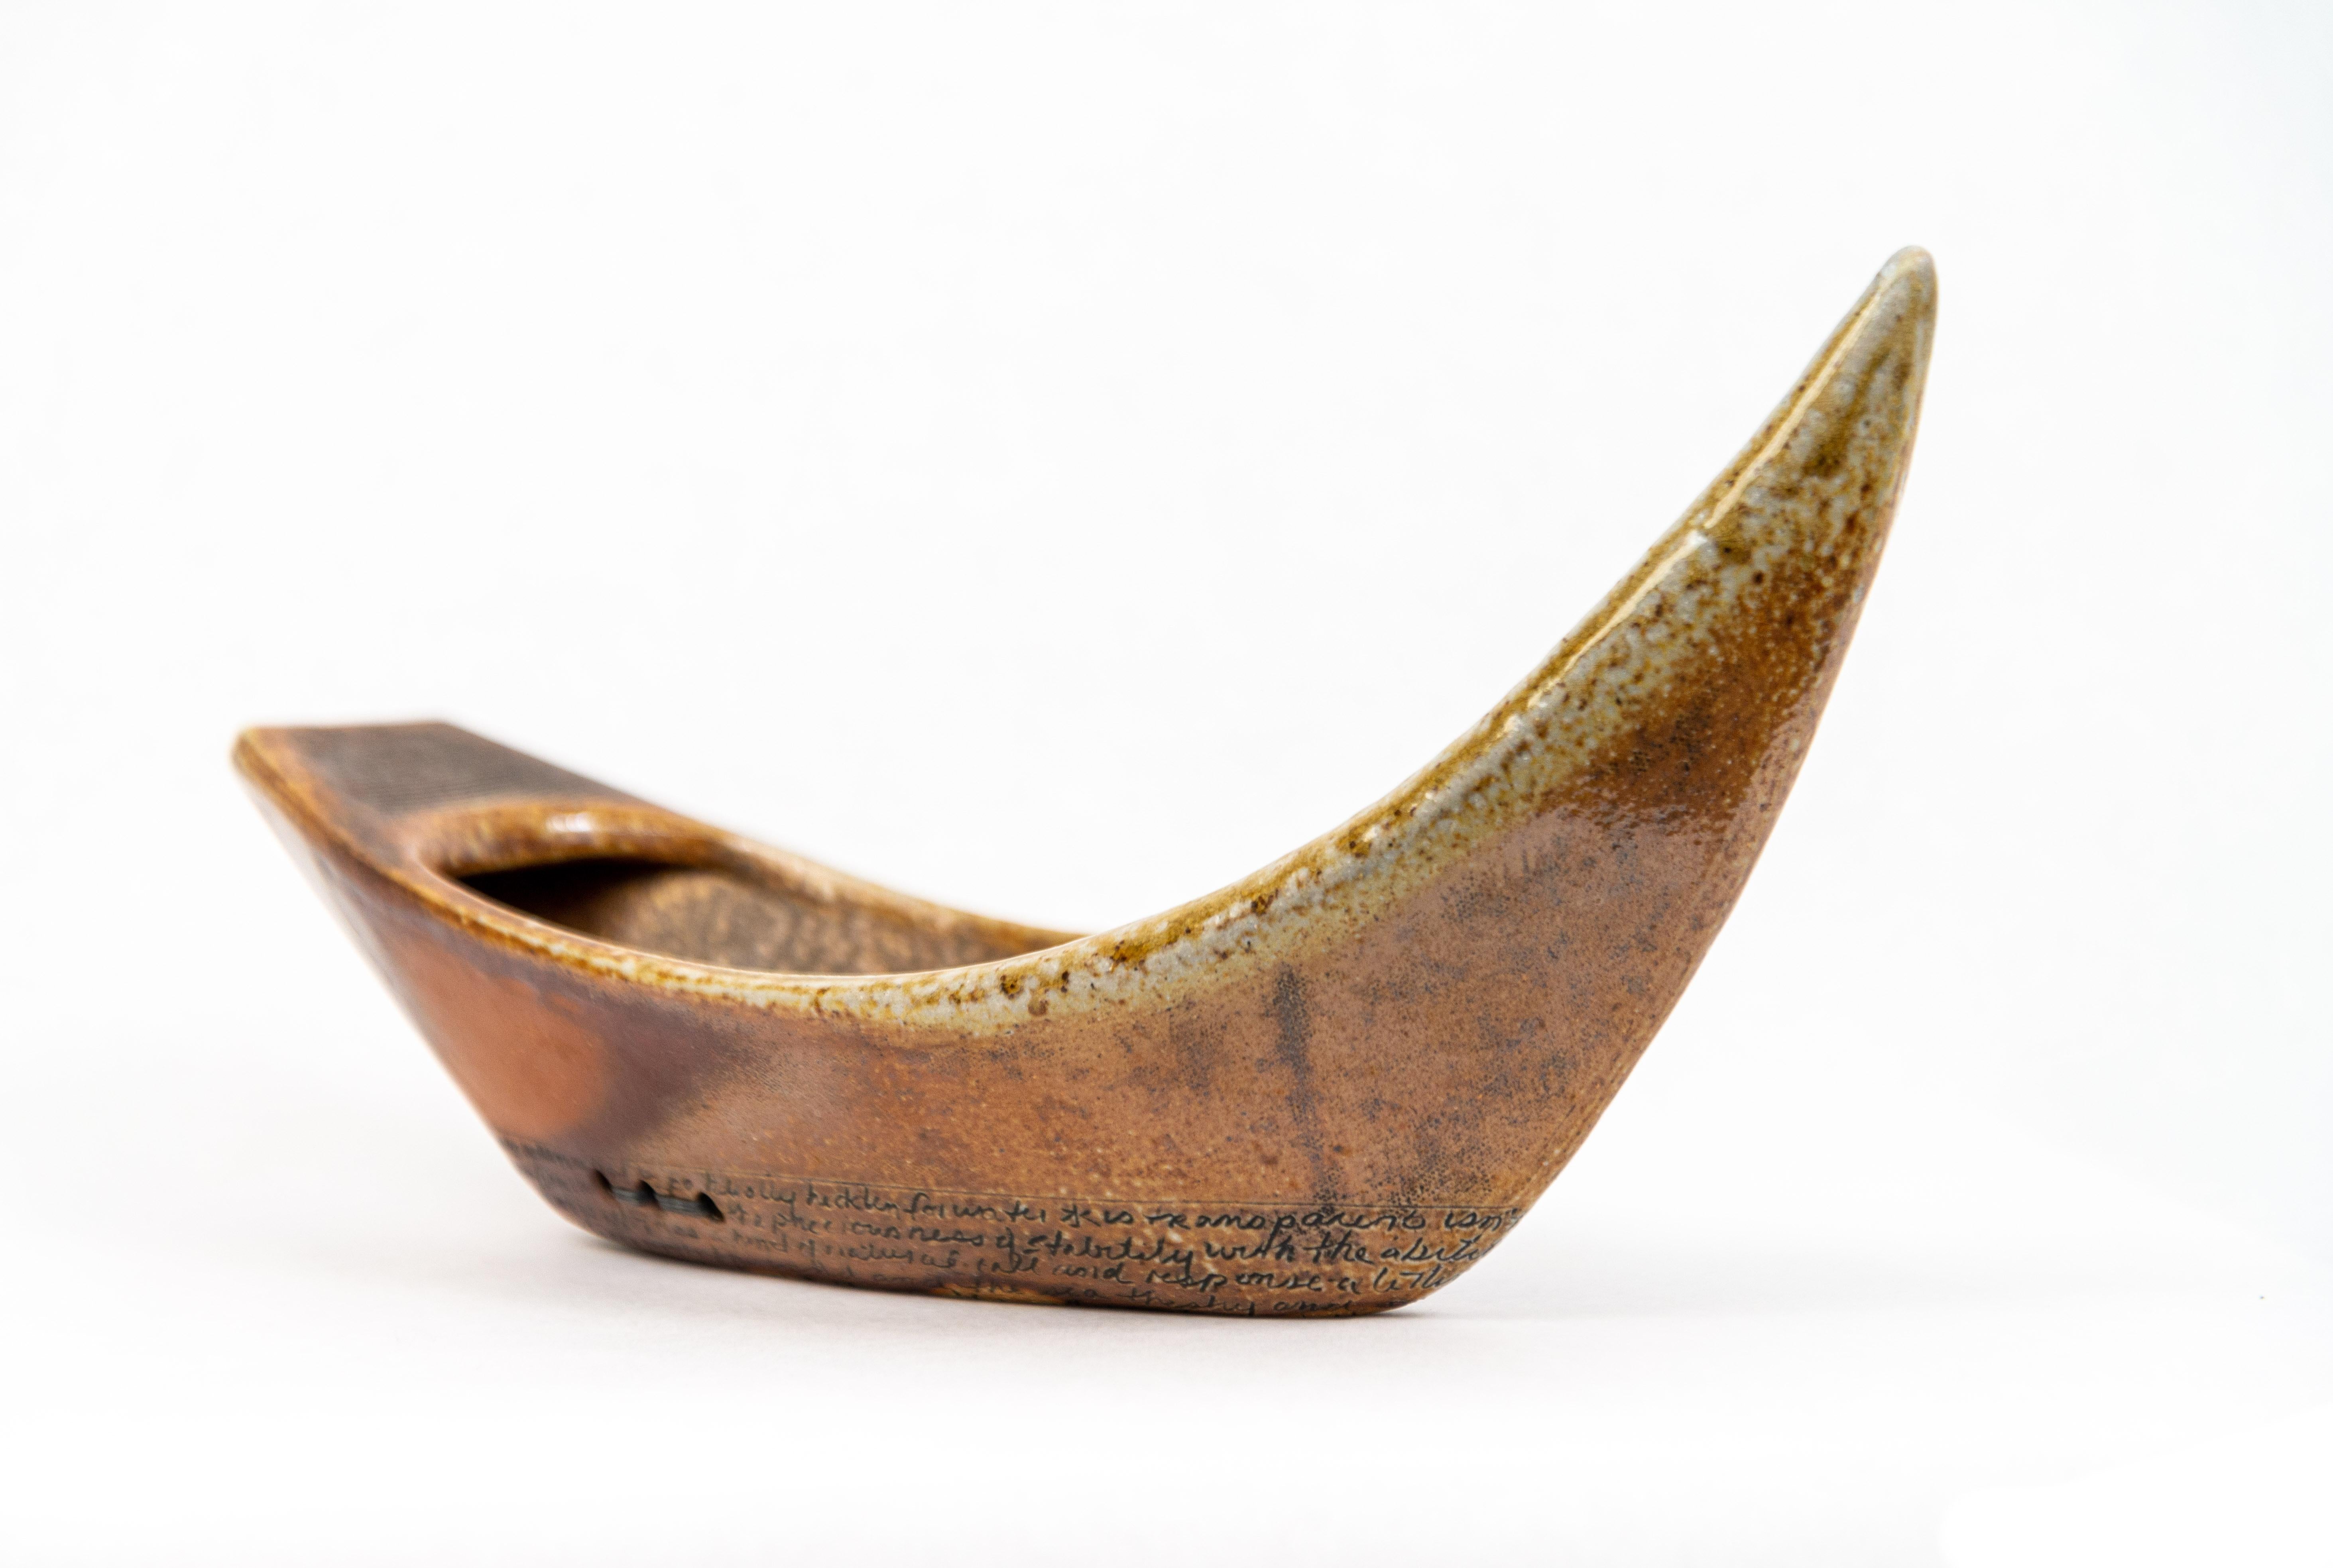 For American artist Heather Allen Hietala, the hand-built clay vessels she’s created symbolize the mystery of life’s journey. Rendered in a gorgeous earthy palette, this piece features a larger vessel with a smaller one lashed to its interior.